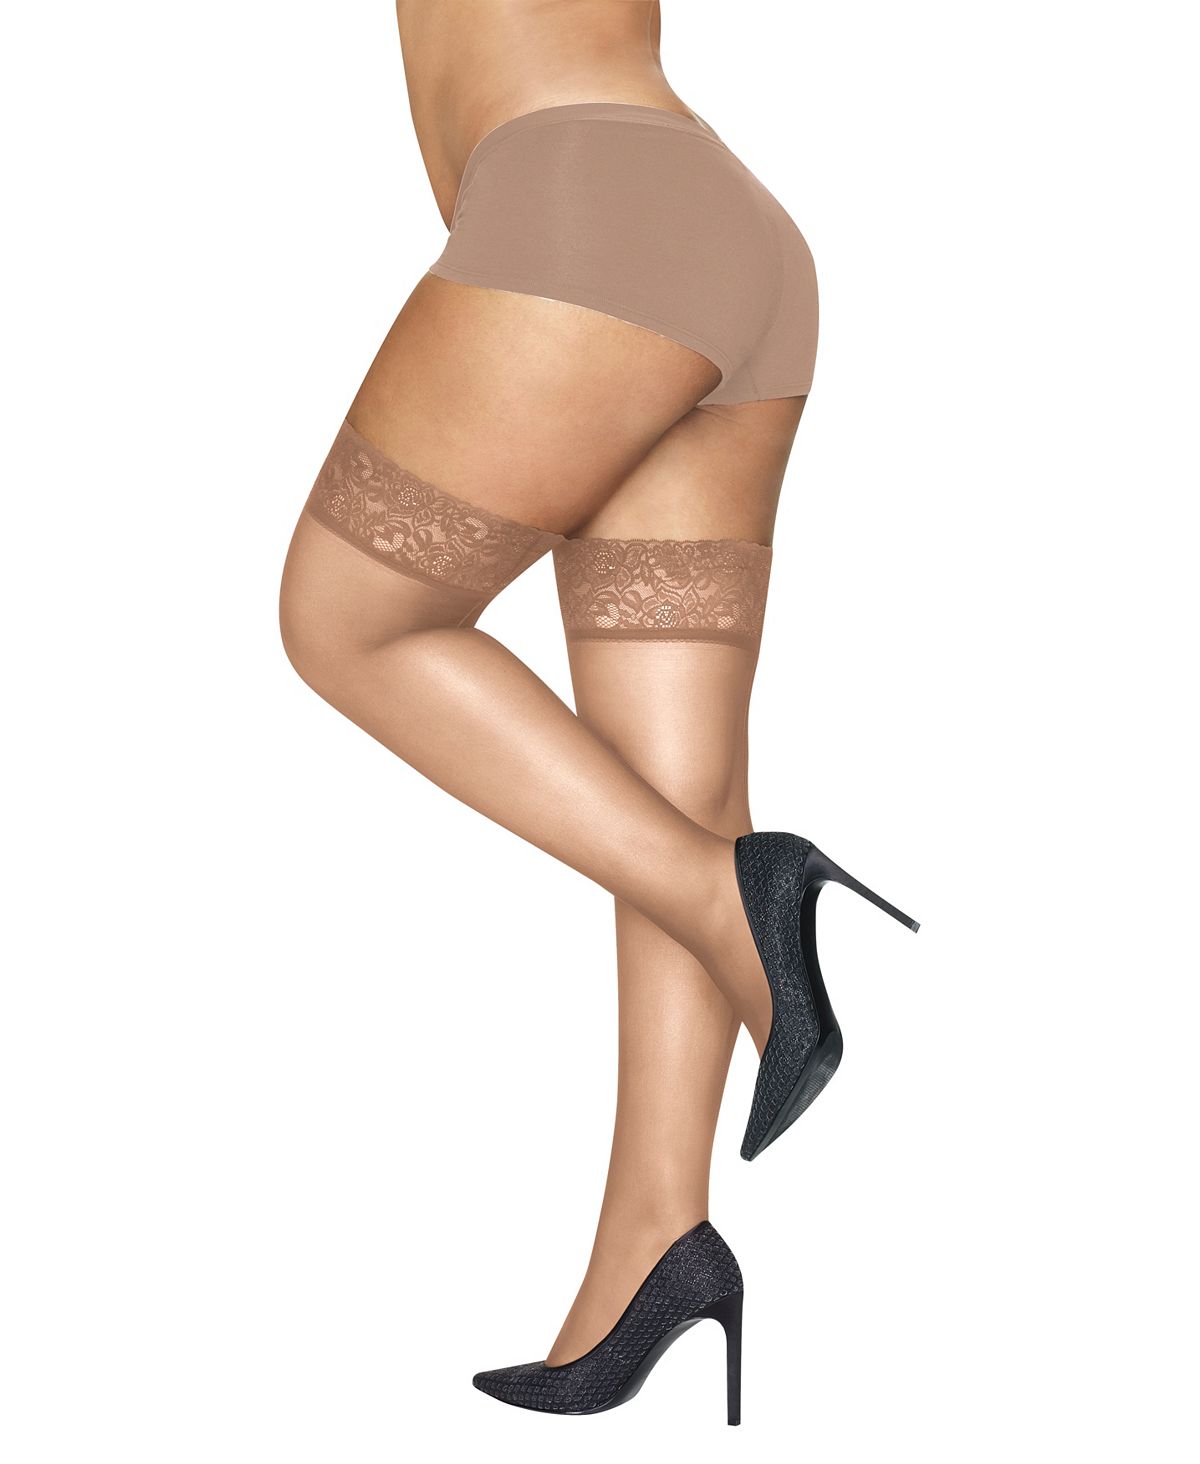 Hanes Plus Lace-band Thigh Highs Nude